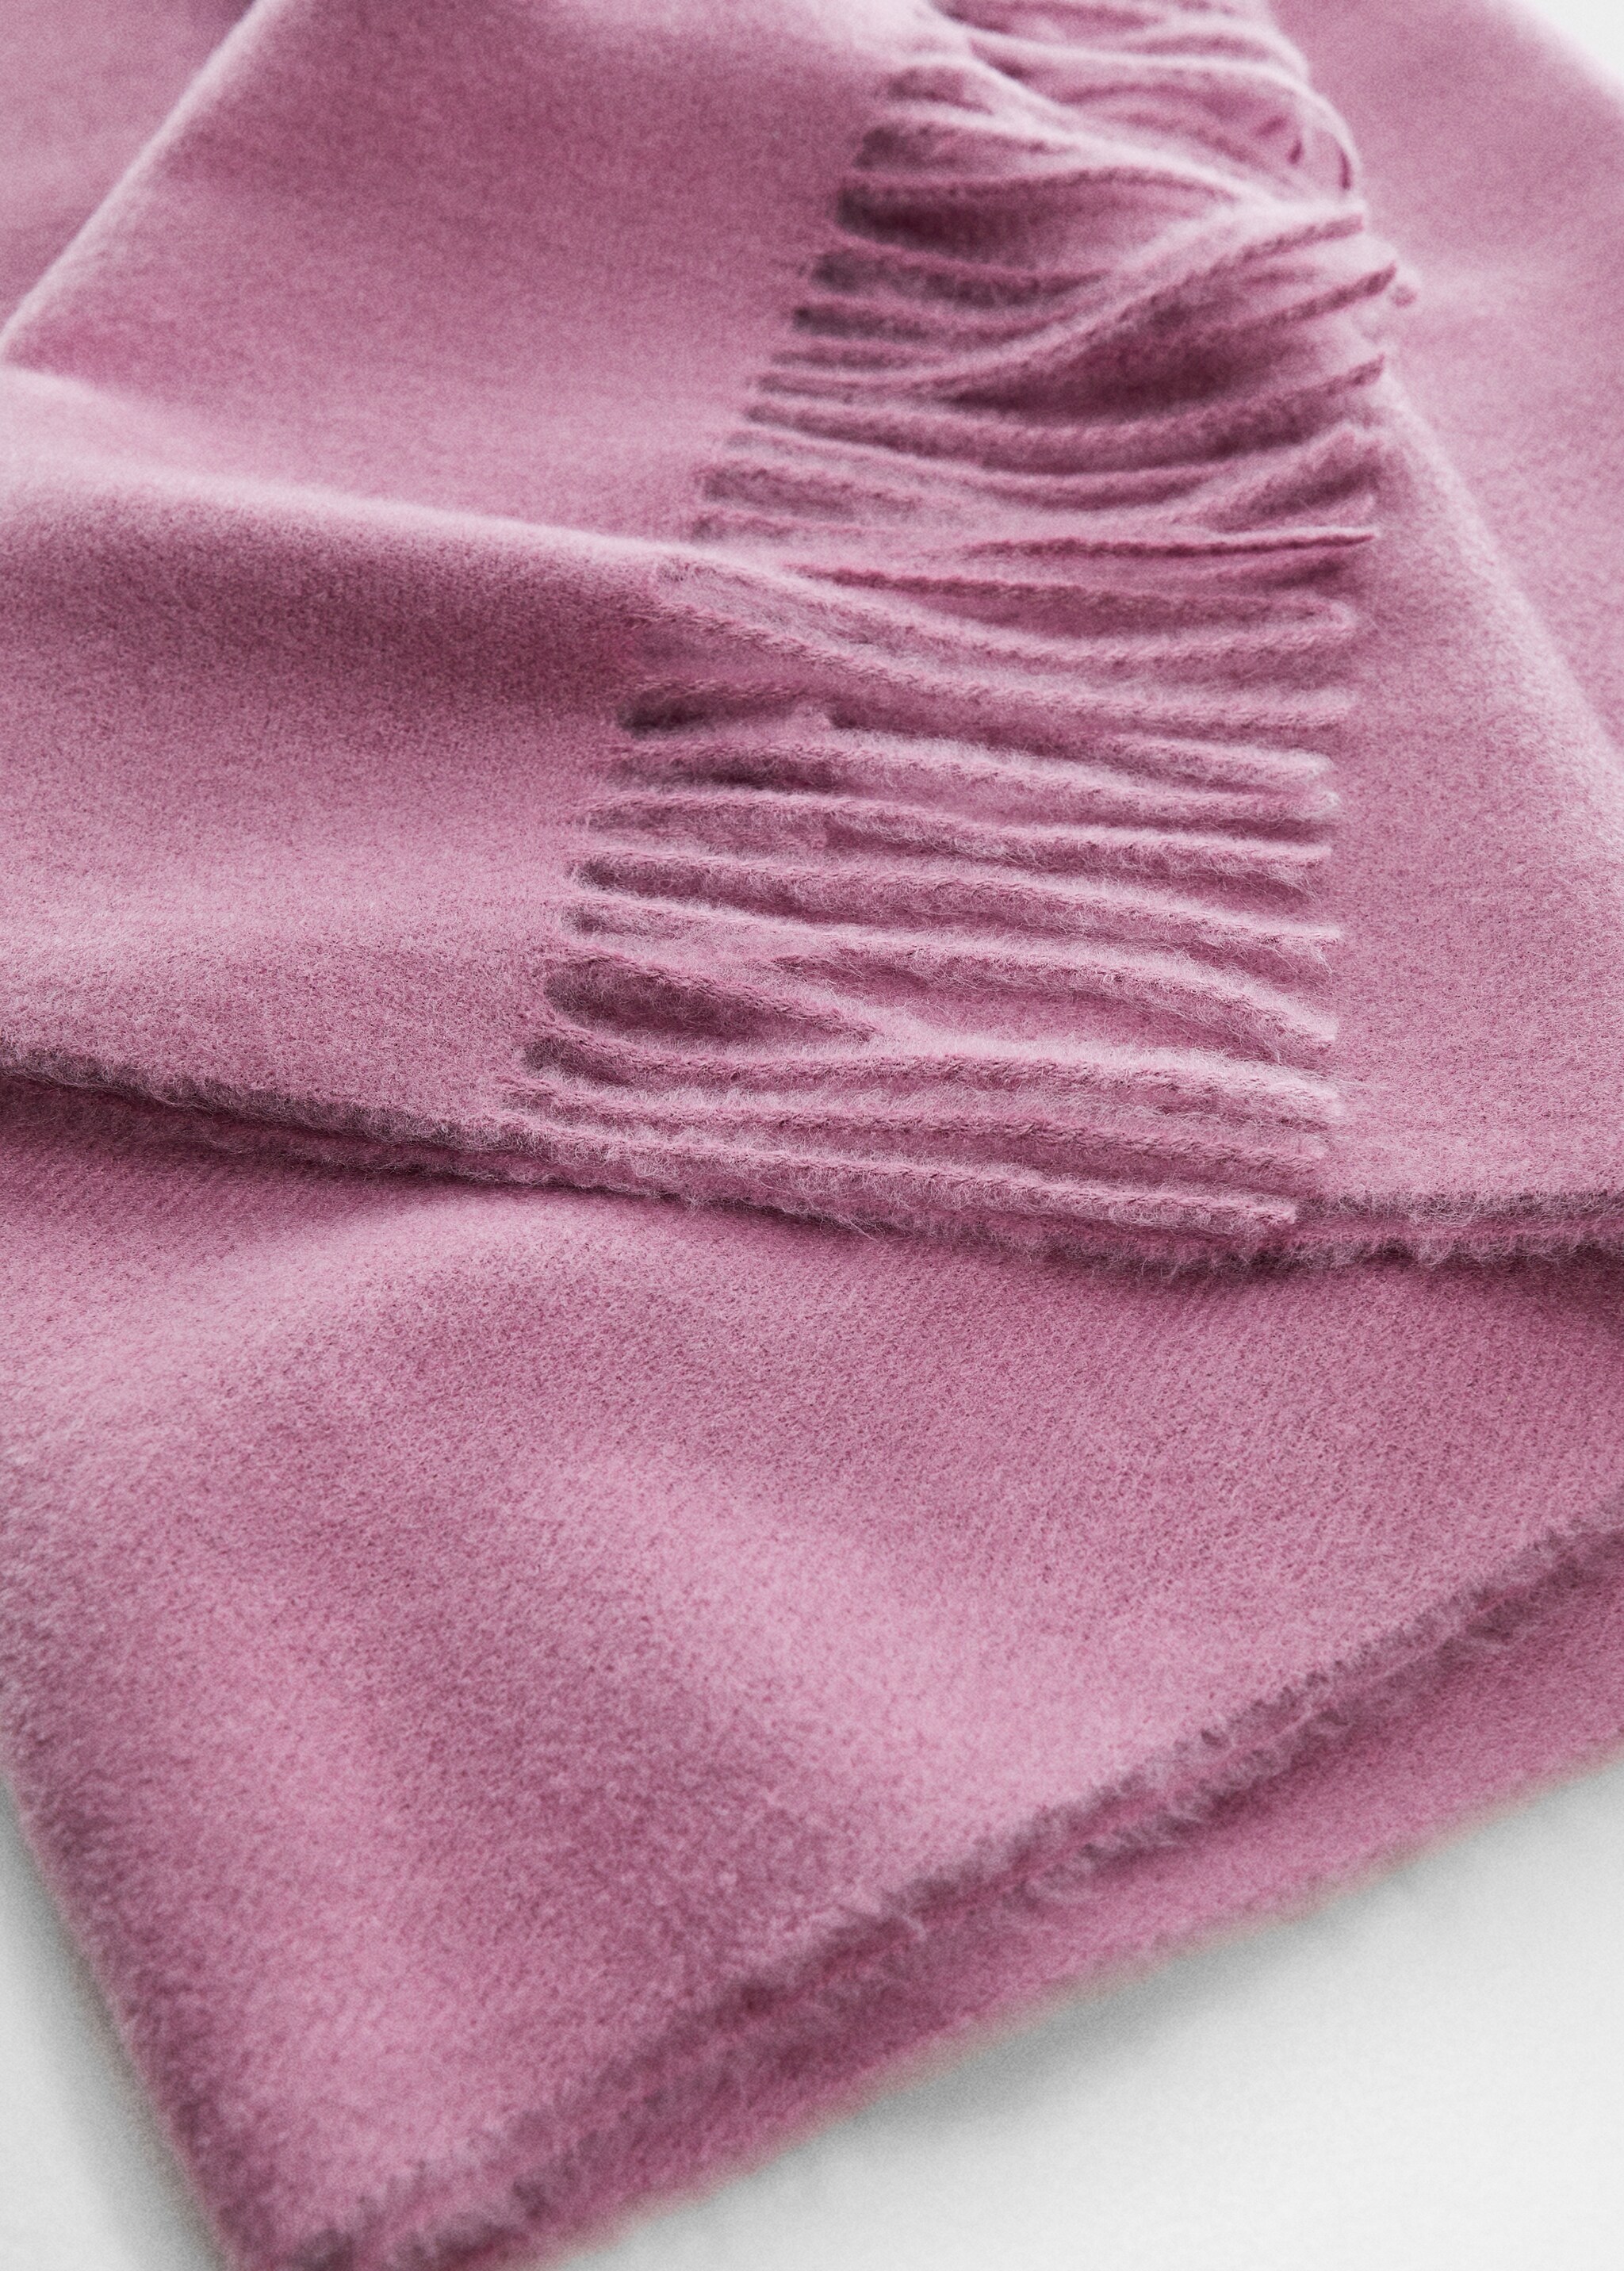 Fringed edge scarf - Details of the article 1